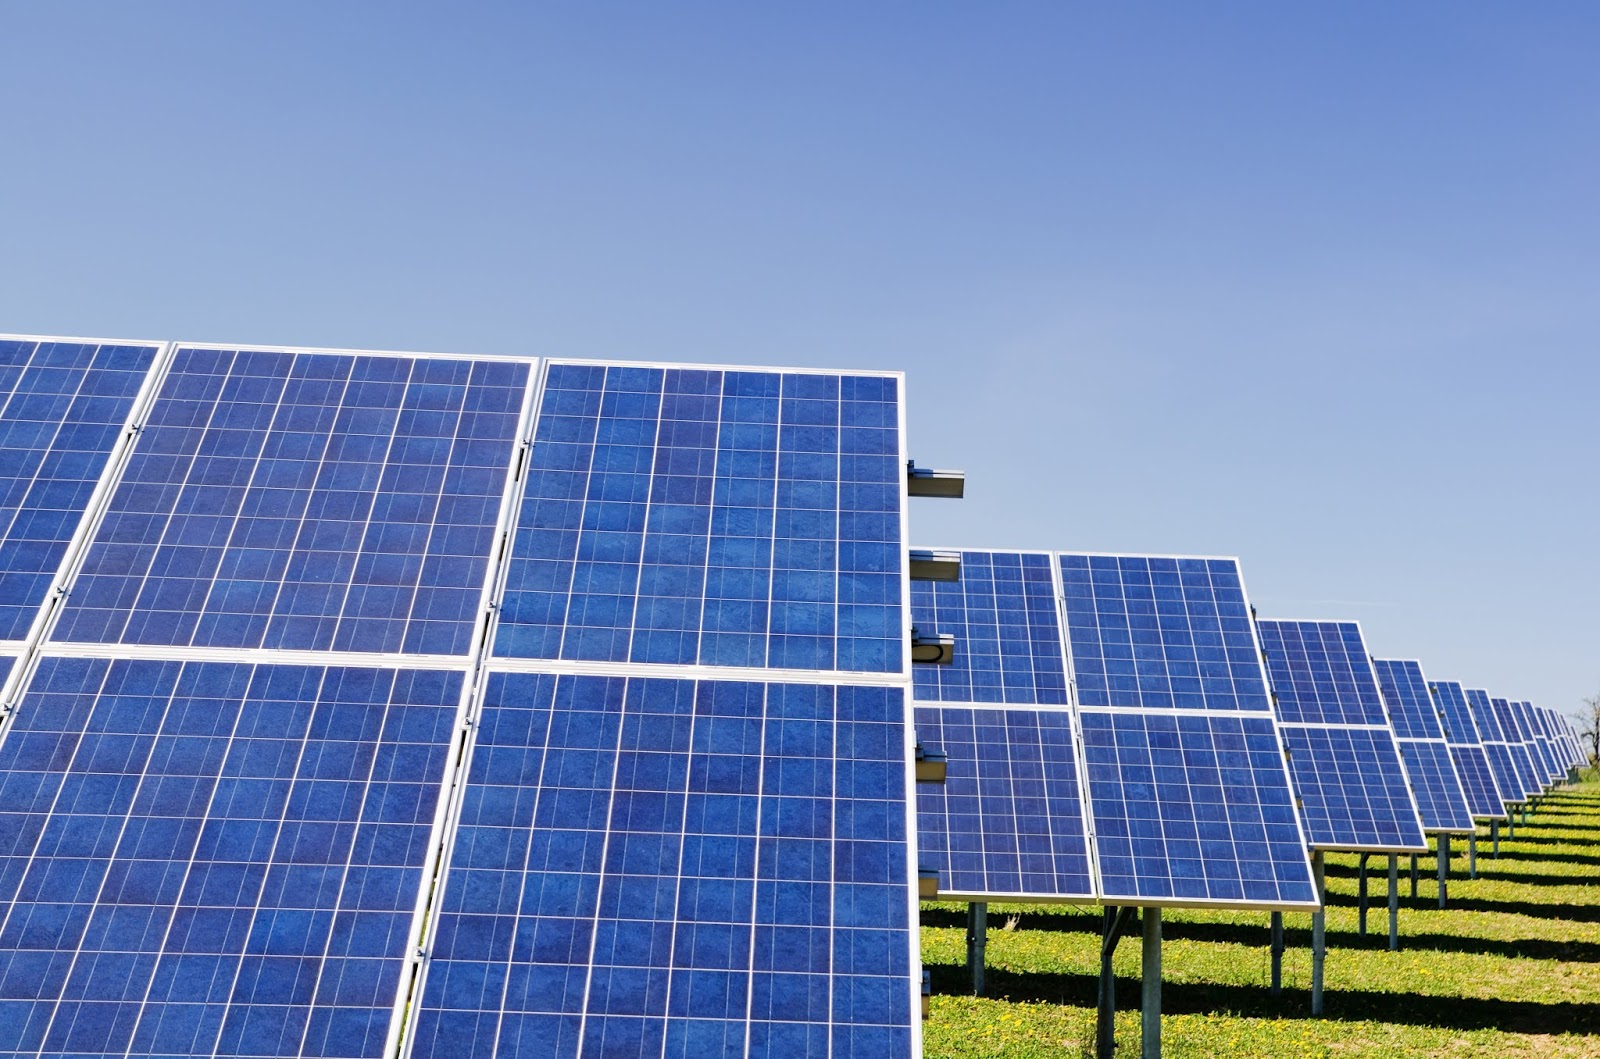 How to design a solar pv system